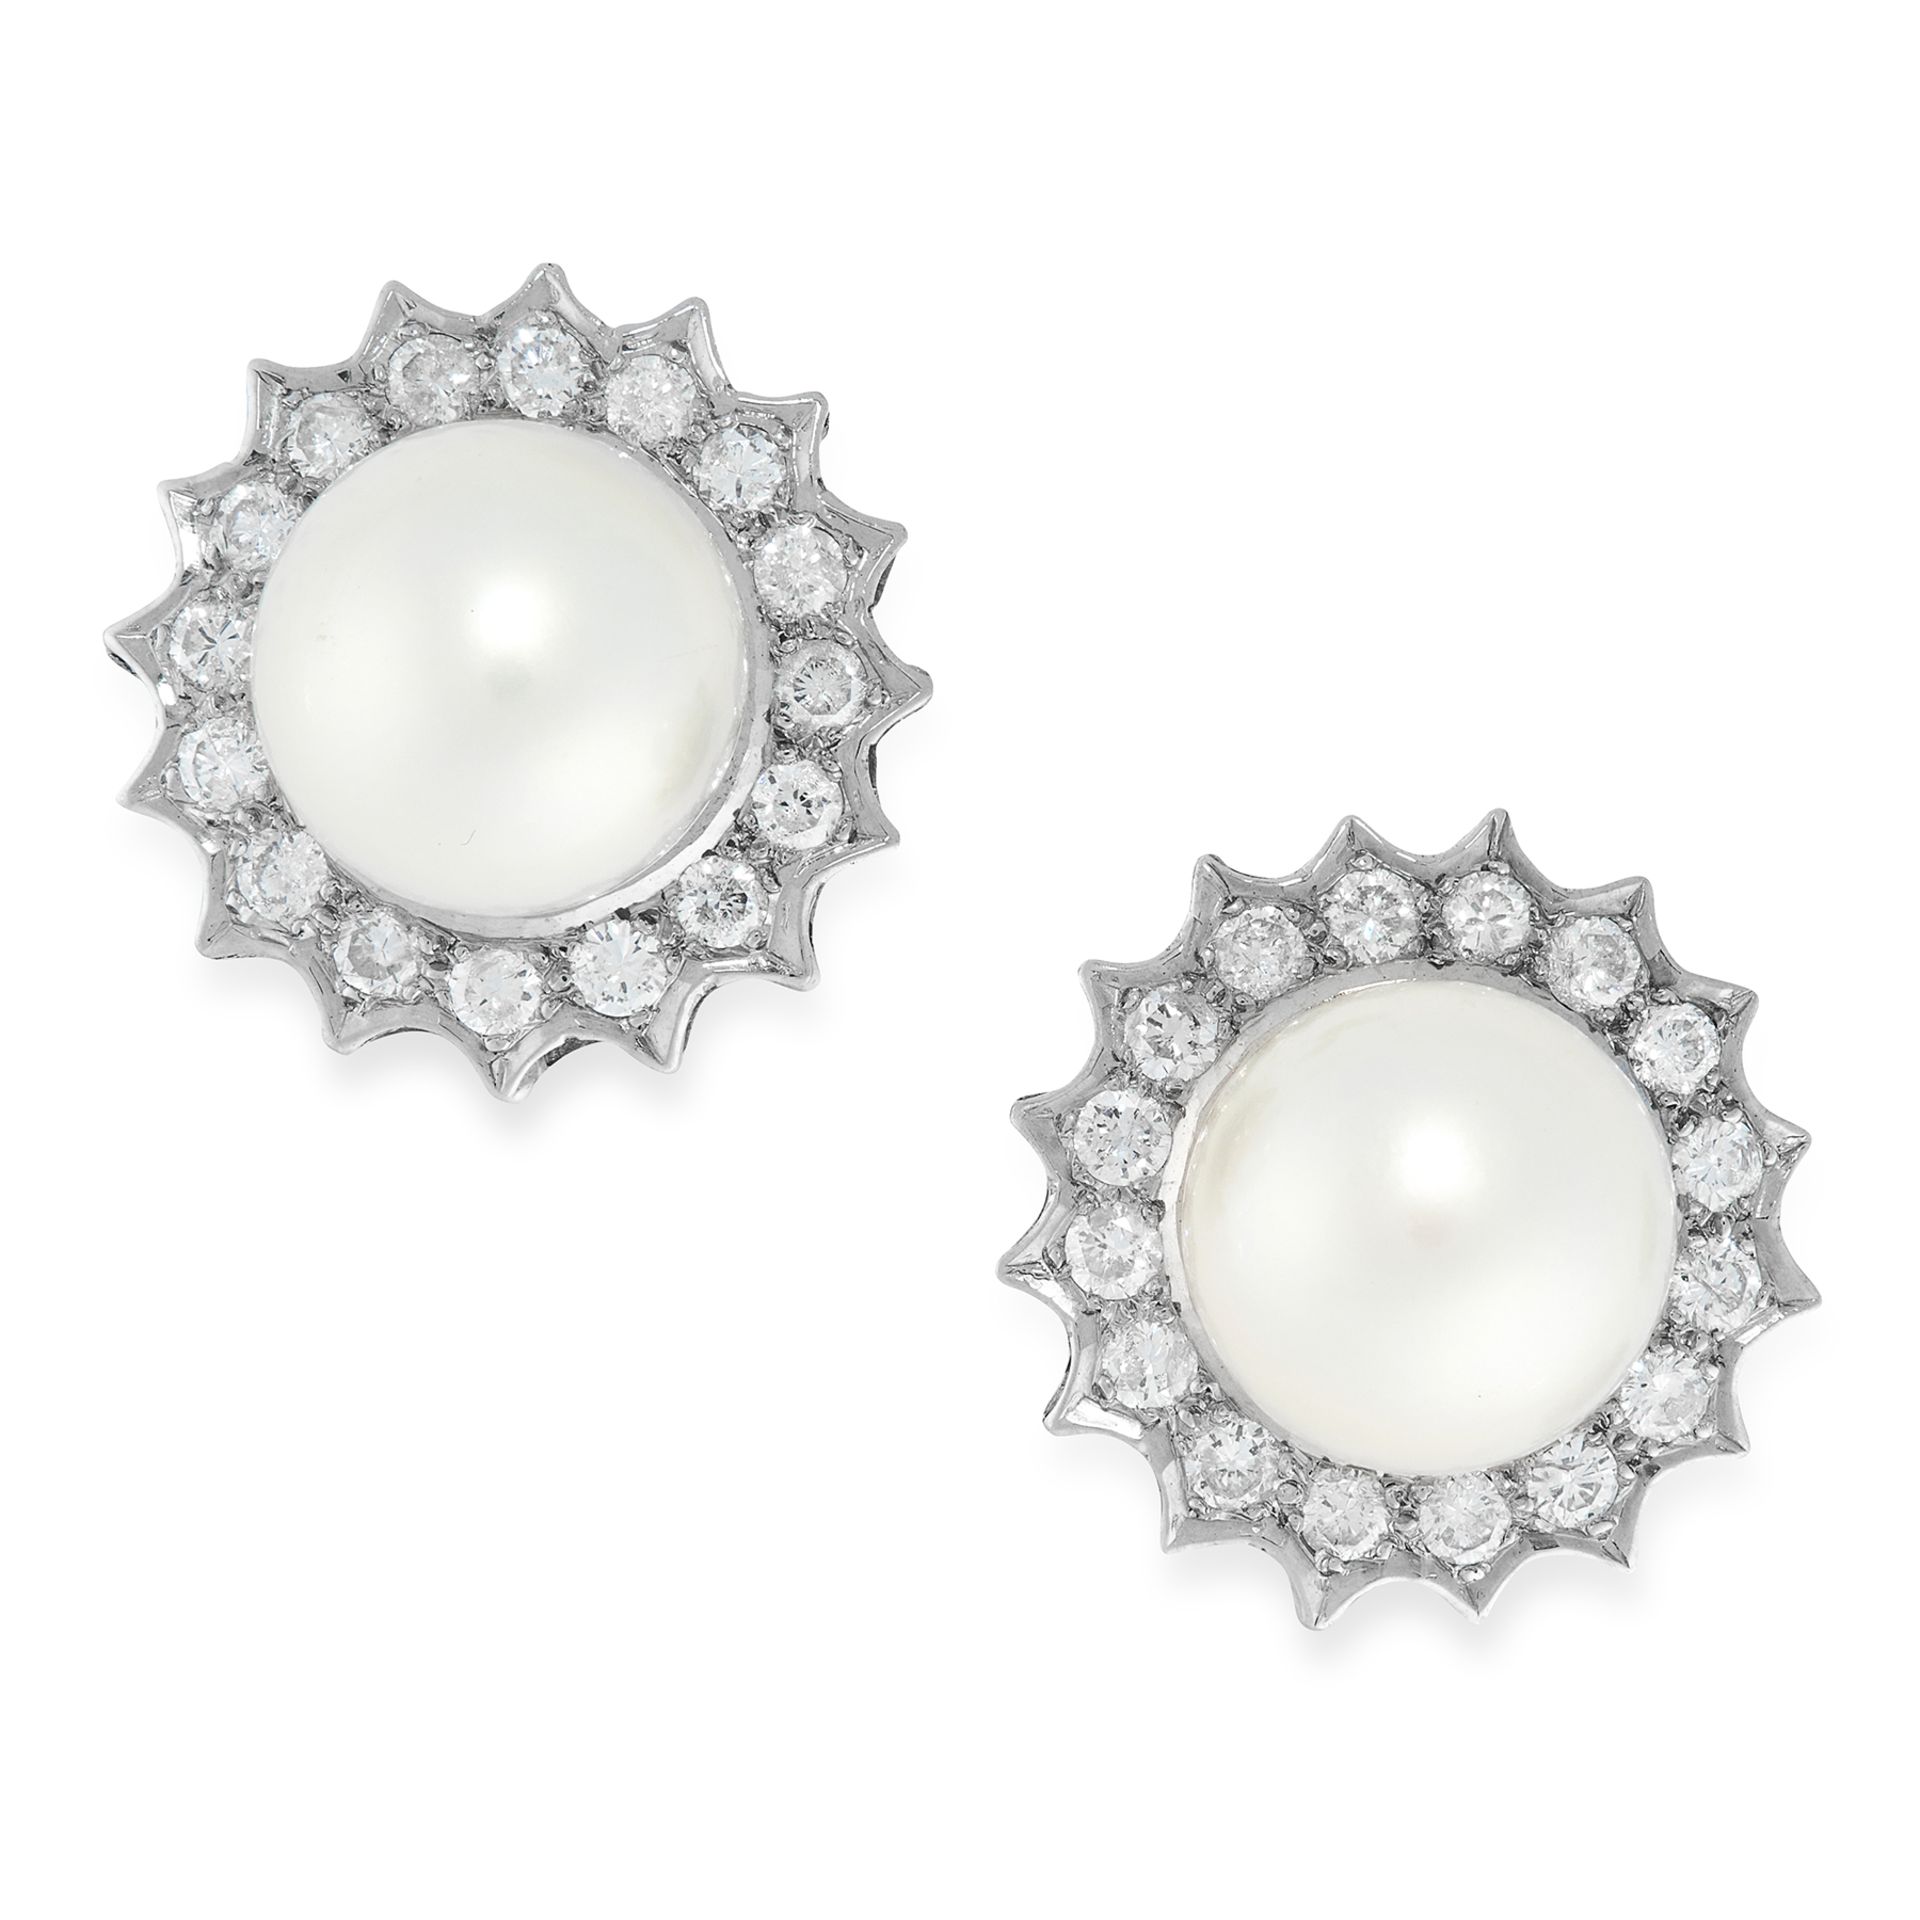 A PAIR OF PEARL AND DIAMOND CLUSTER EARRINGS in 18ct white gold, each set with a central pearl of